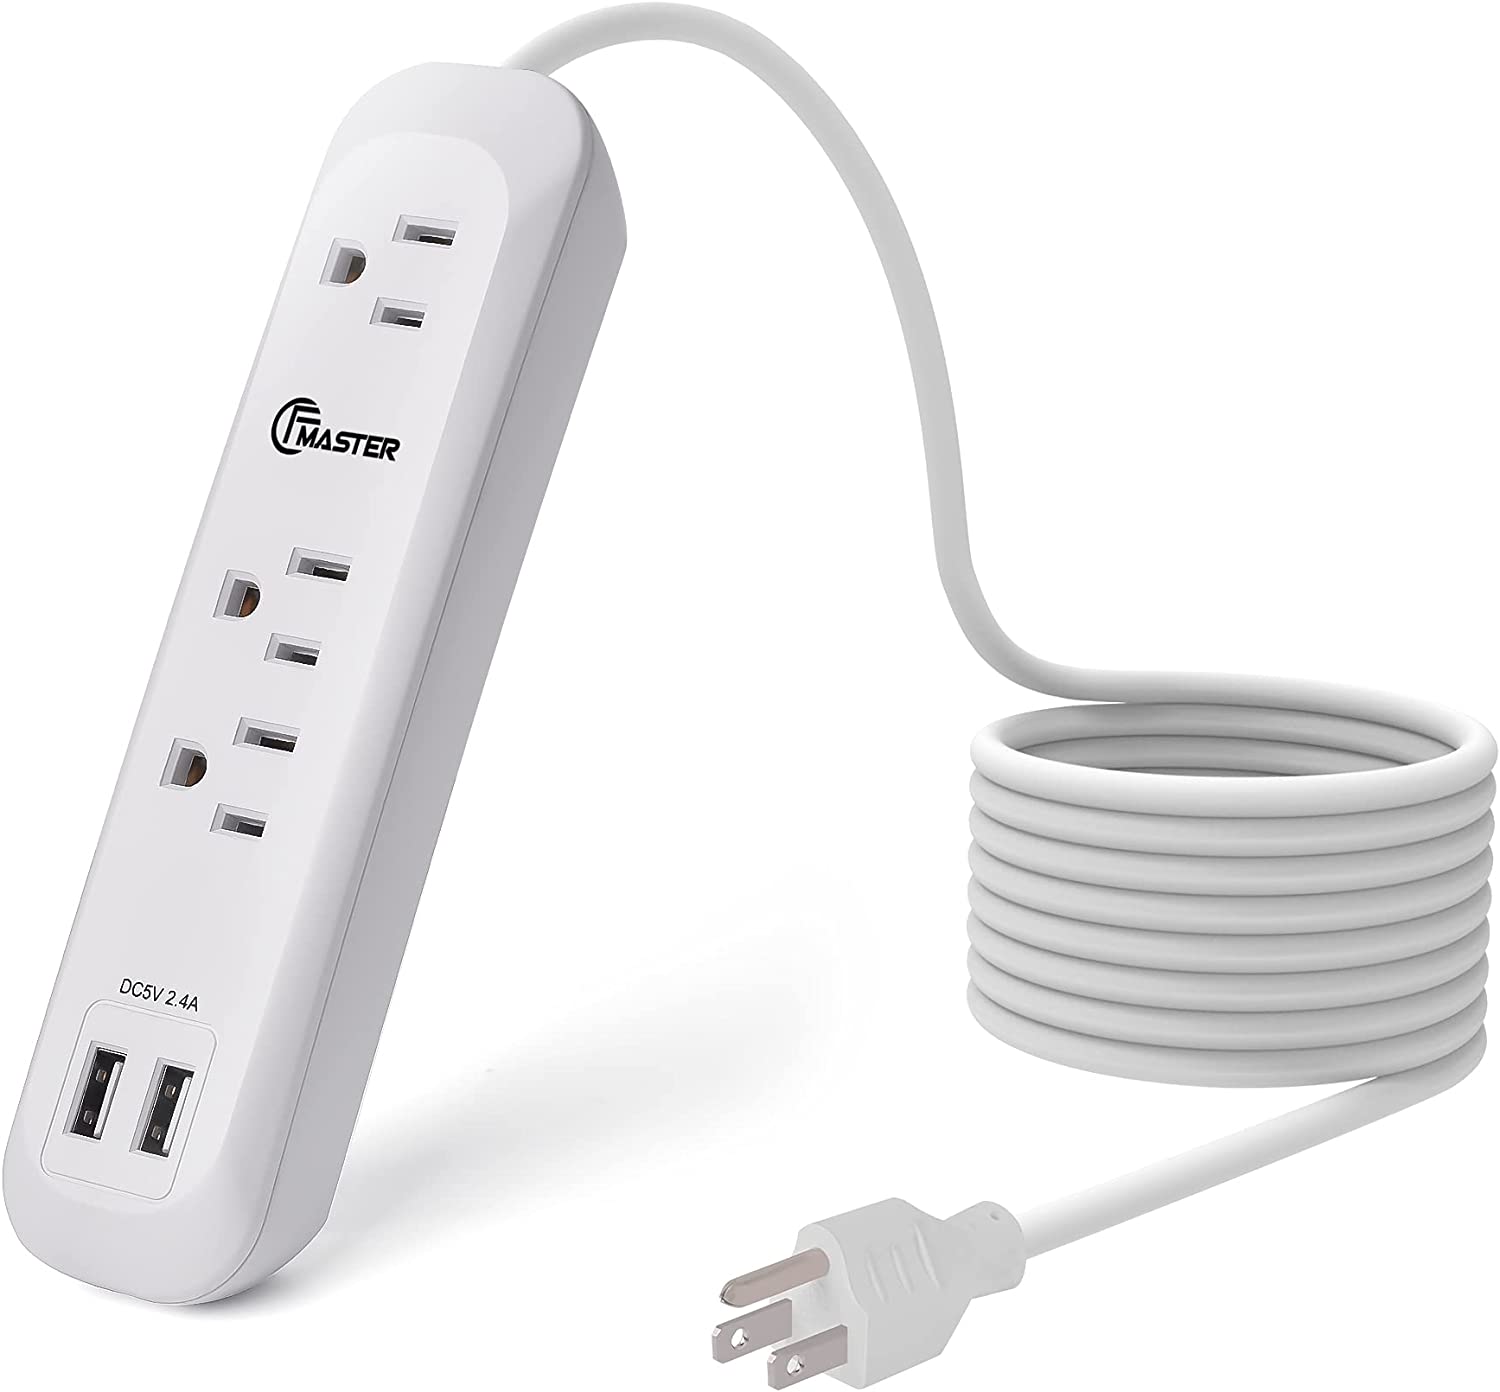 12ft Long Extension Cord, 3 Outlets, 2 USB Ports, White